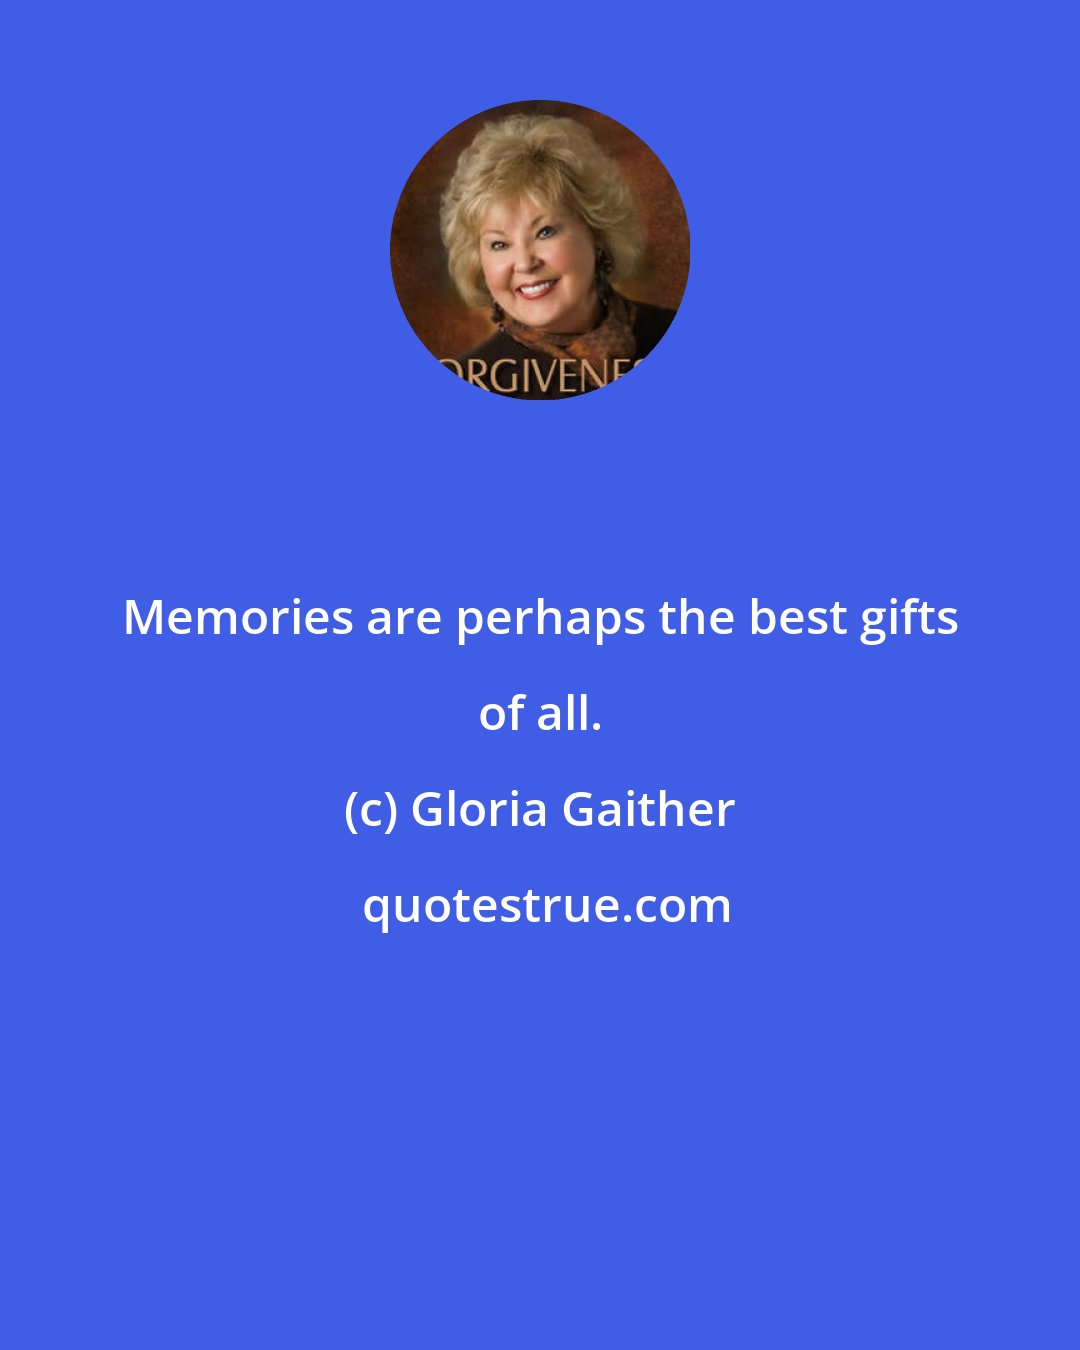 Gloria Gaither: Memories are perhaps the best gifts of all.